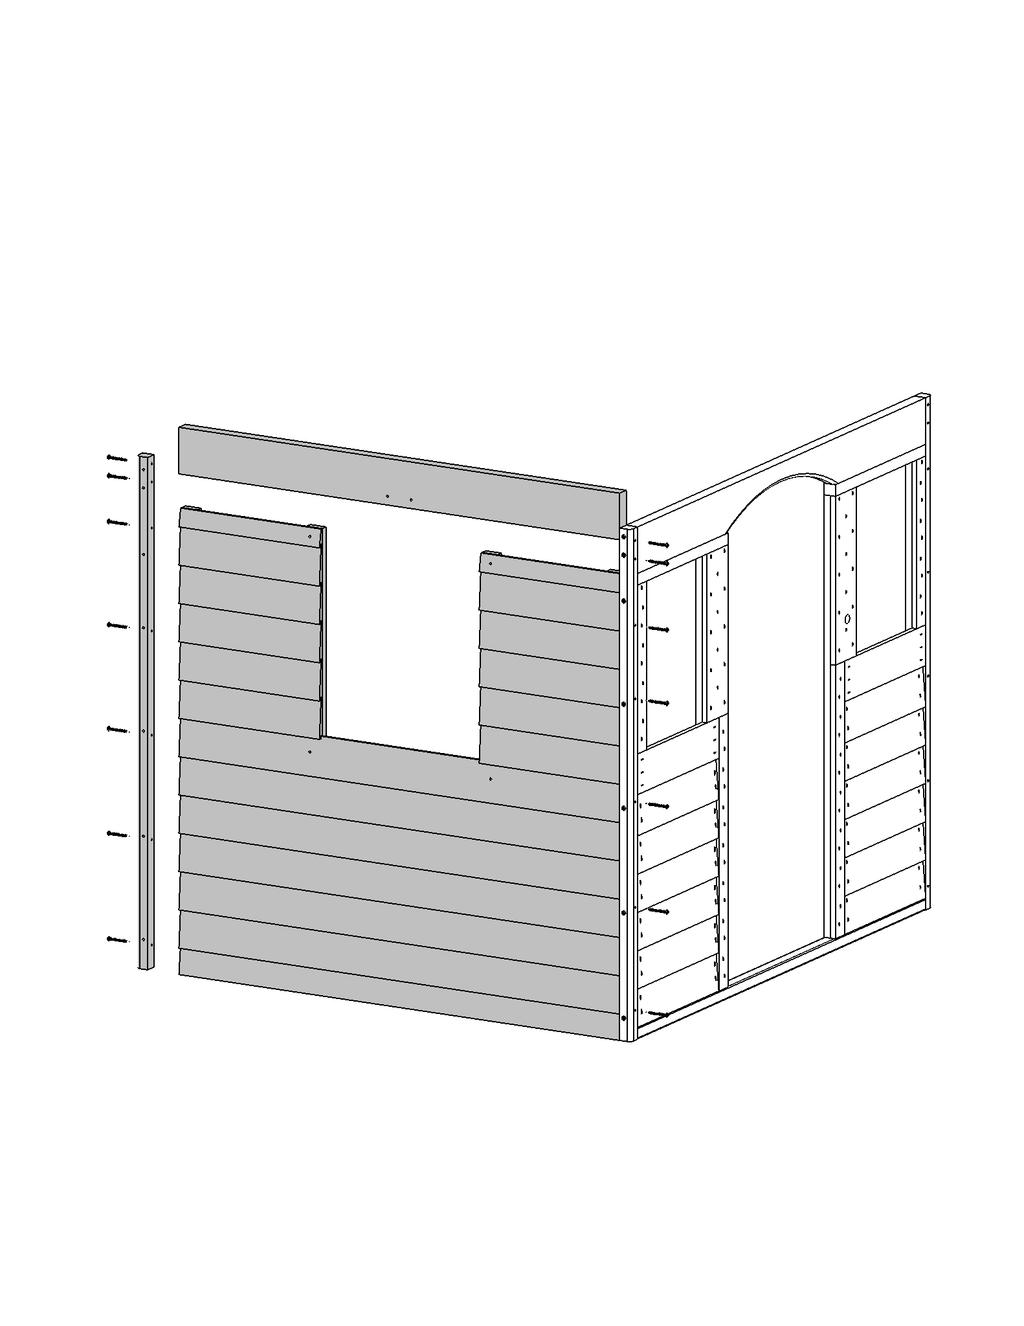 Step 5: Window Wall Assembly A: Place (0324) Shutter Wall Panel tight to (0369) Corner Trim on (0322) Front Left Wall so the inside board is flush to the inside edge of (0369) Corner Trim.